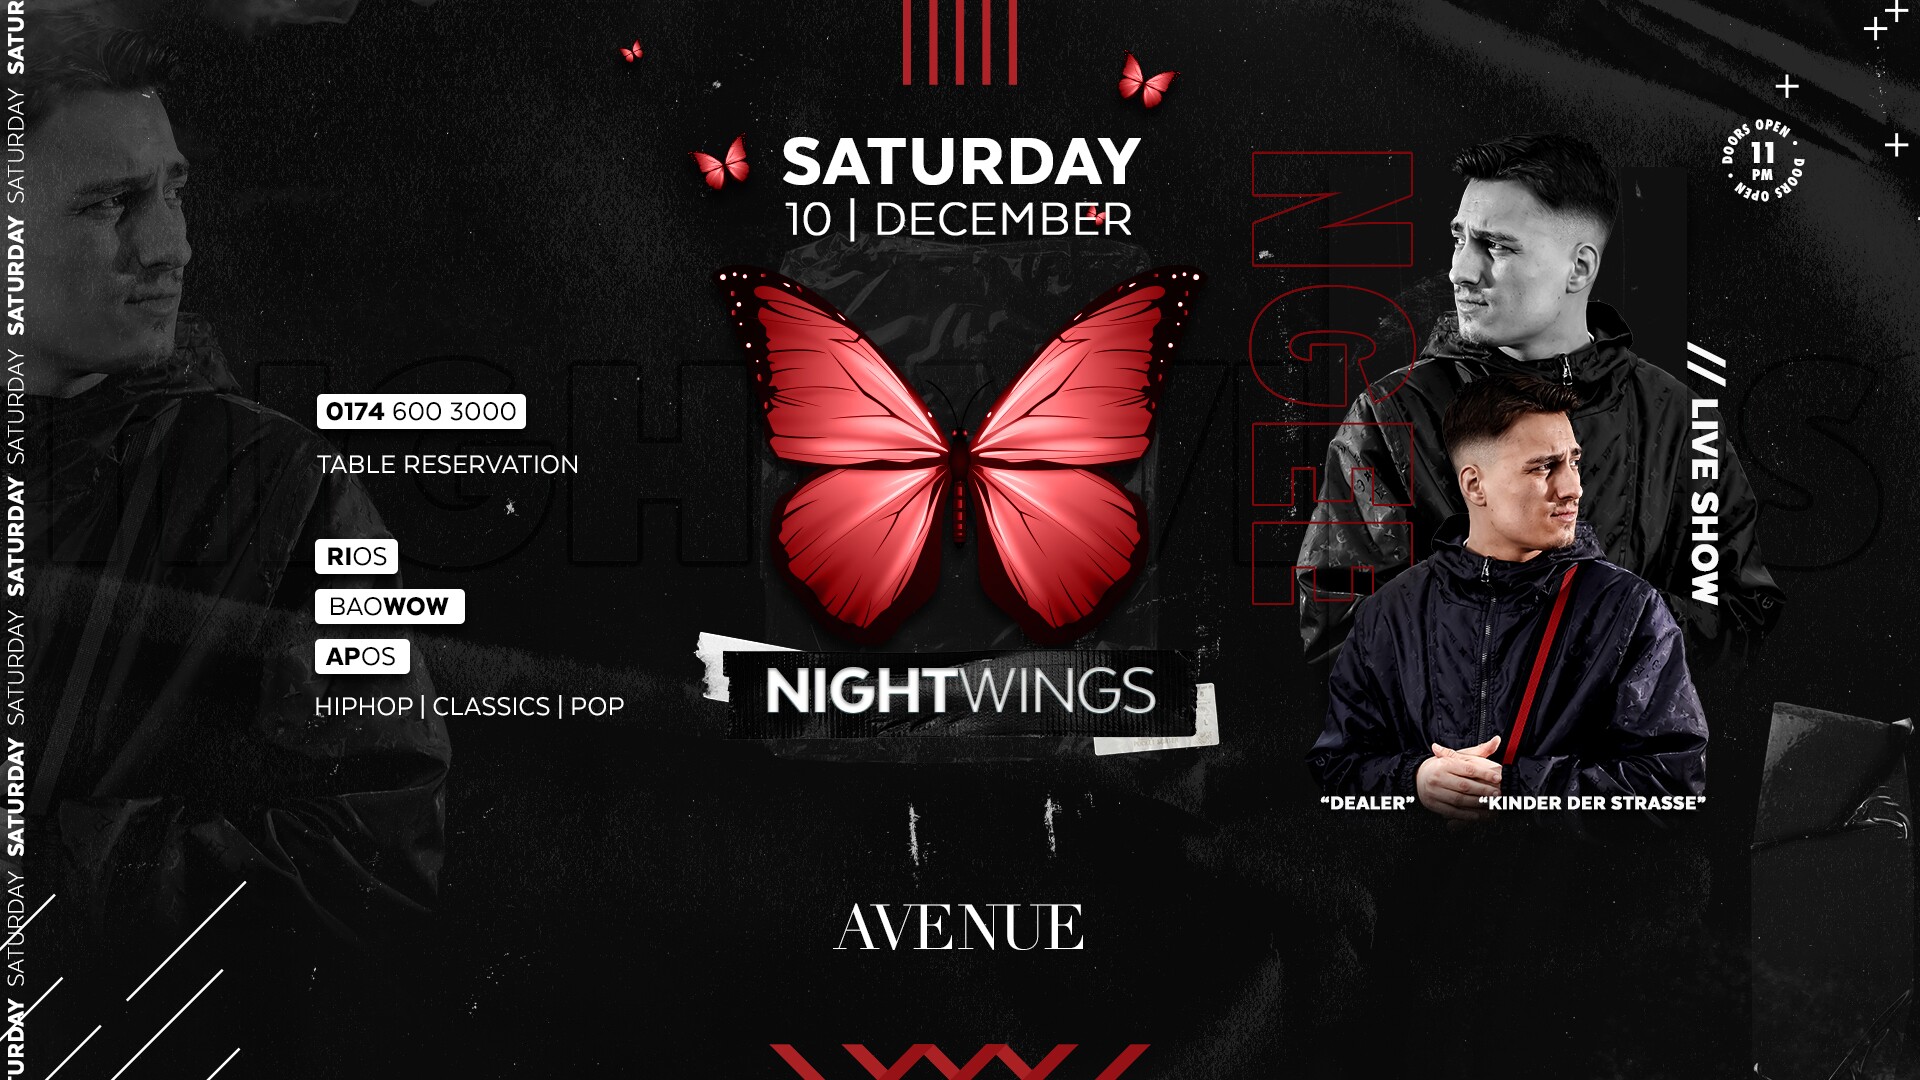 Avenue 10.12.2022 Nightwings | Ngee Live Show